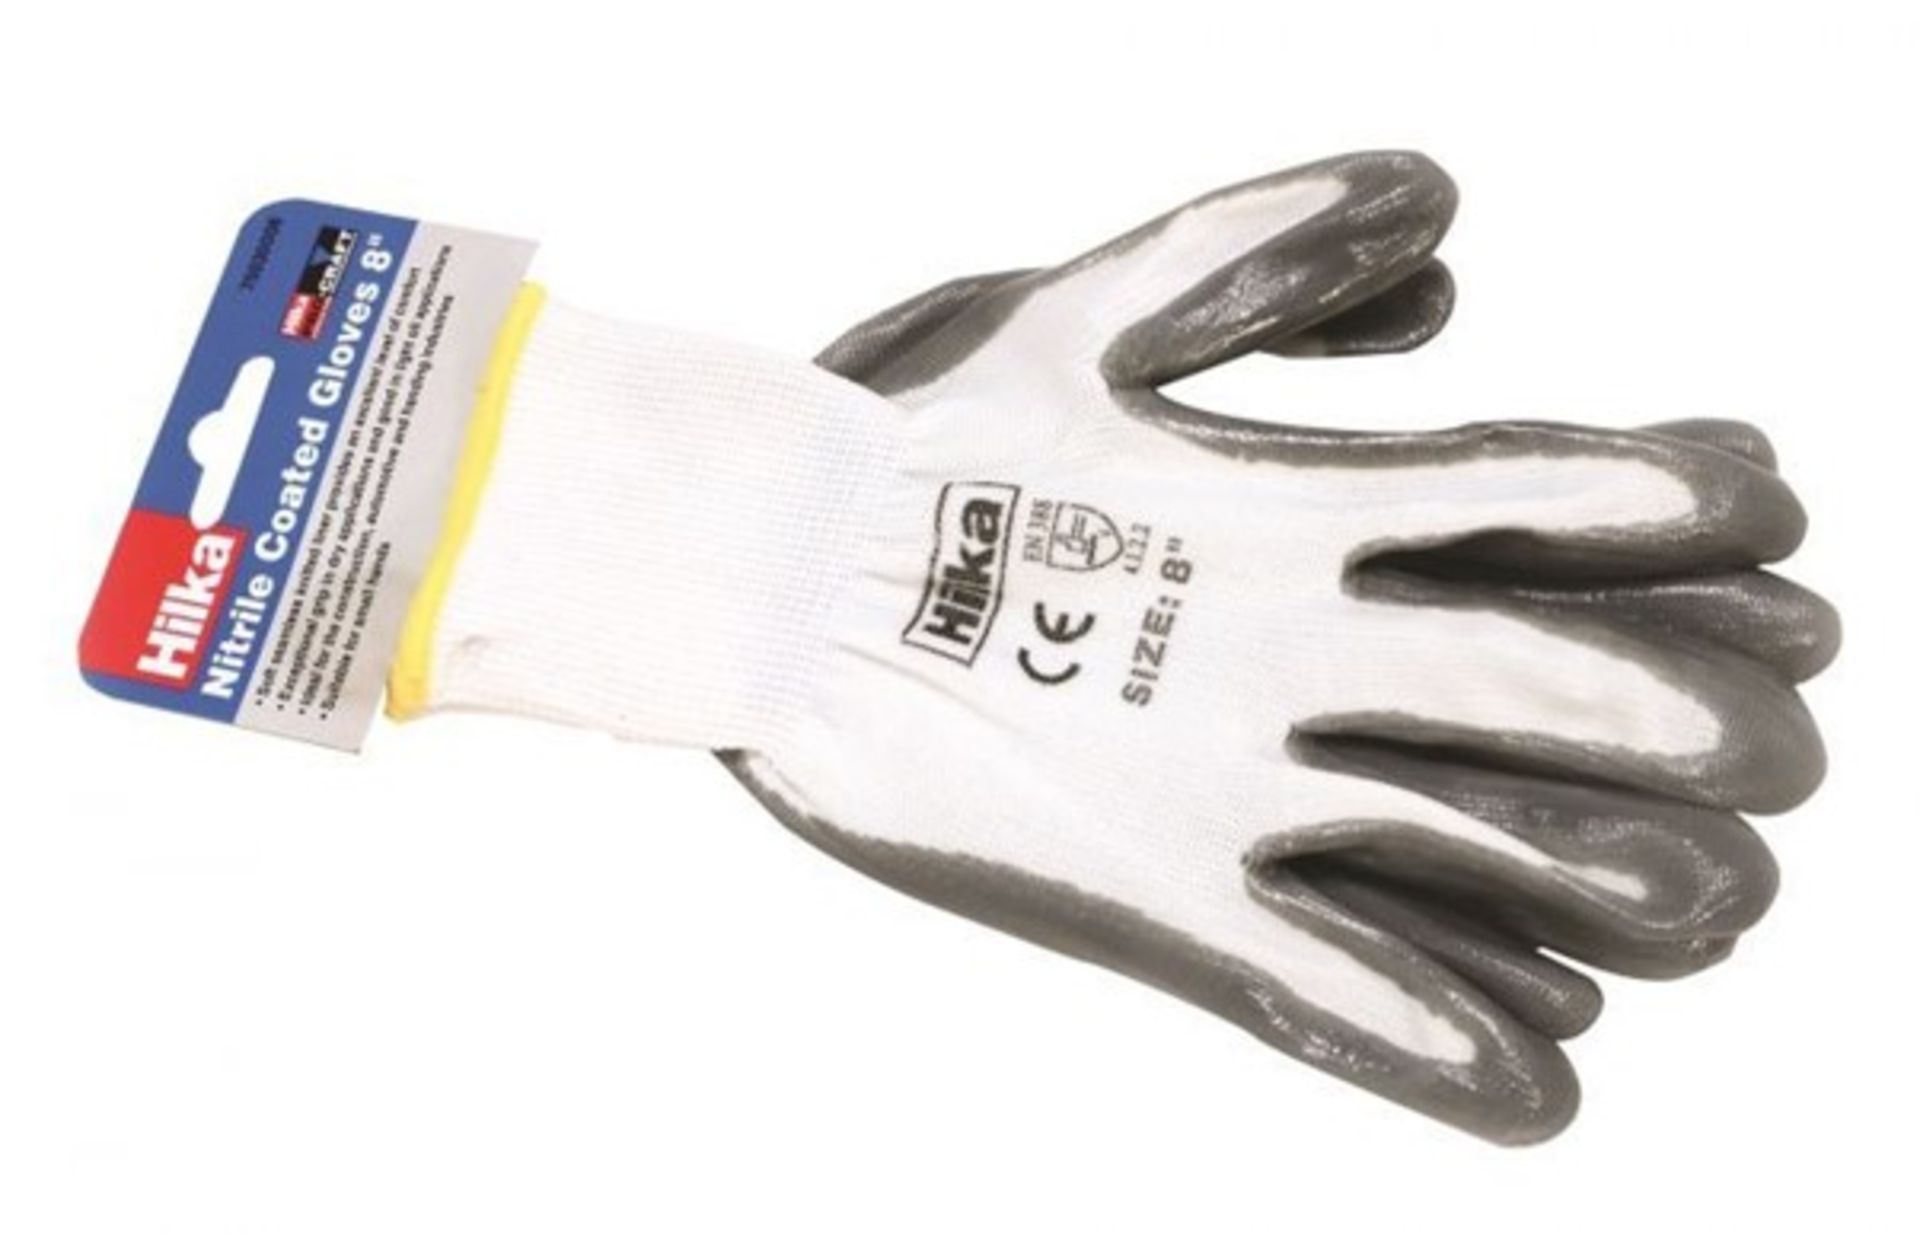 x3 Pairs Of New Hilka Small 8" Nitrile Coated Work Gloves